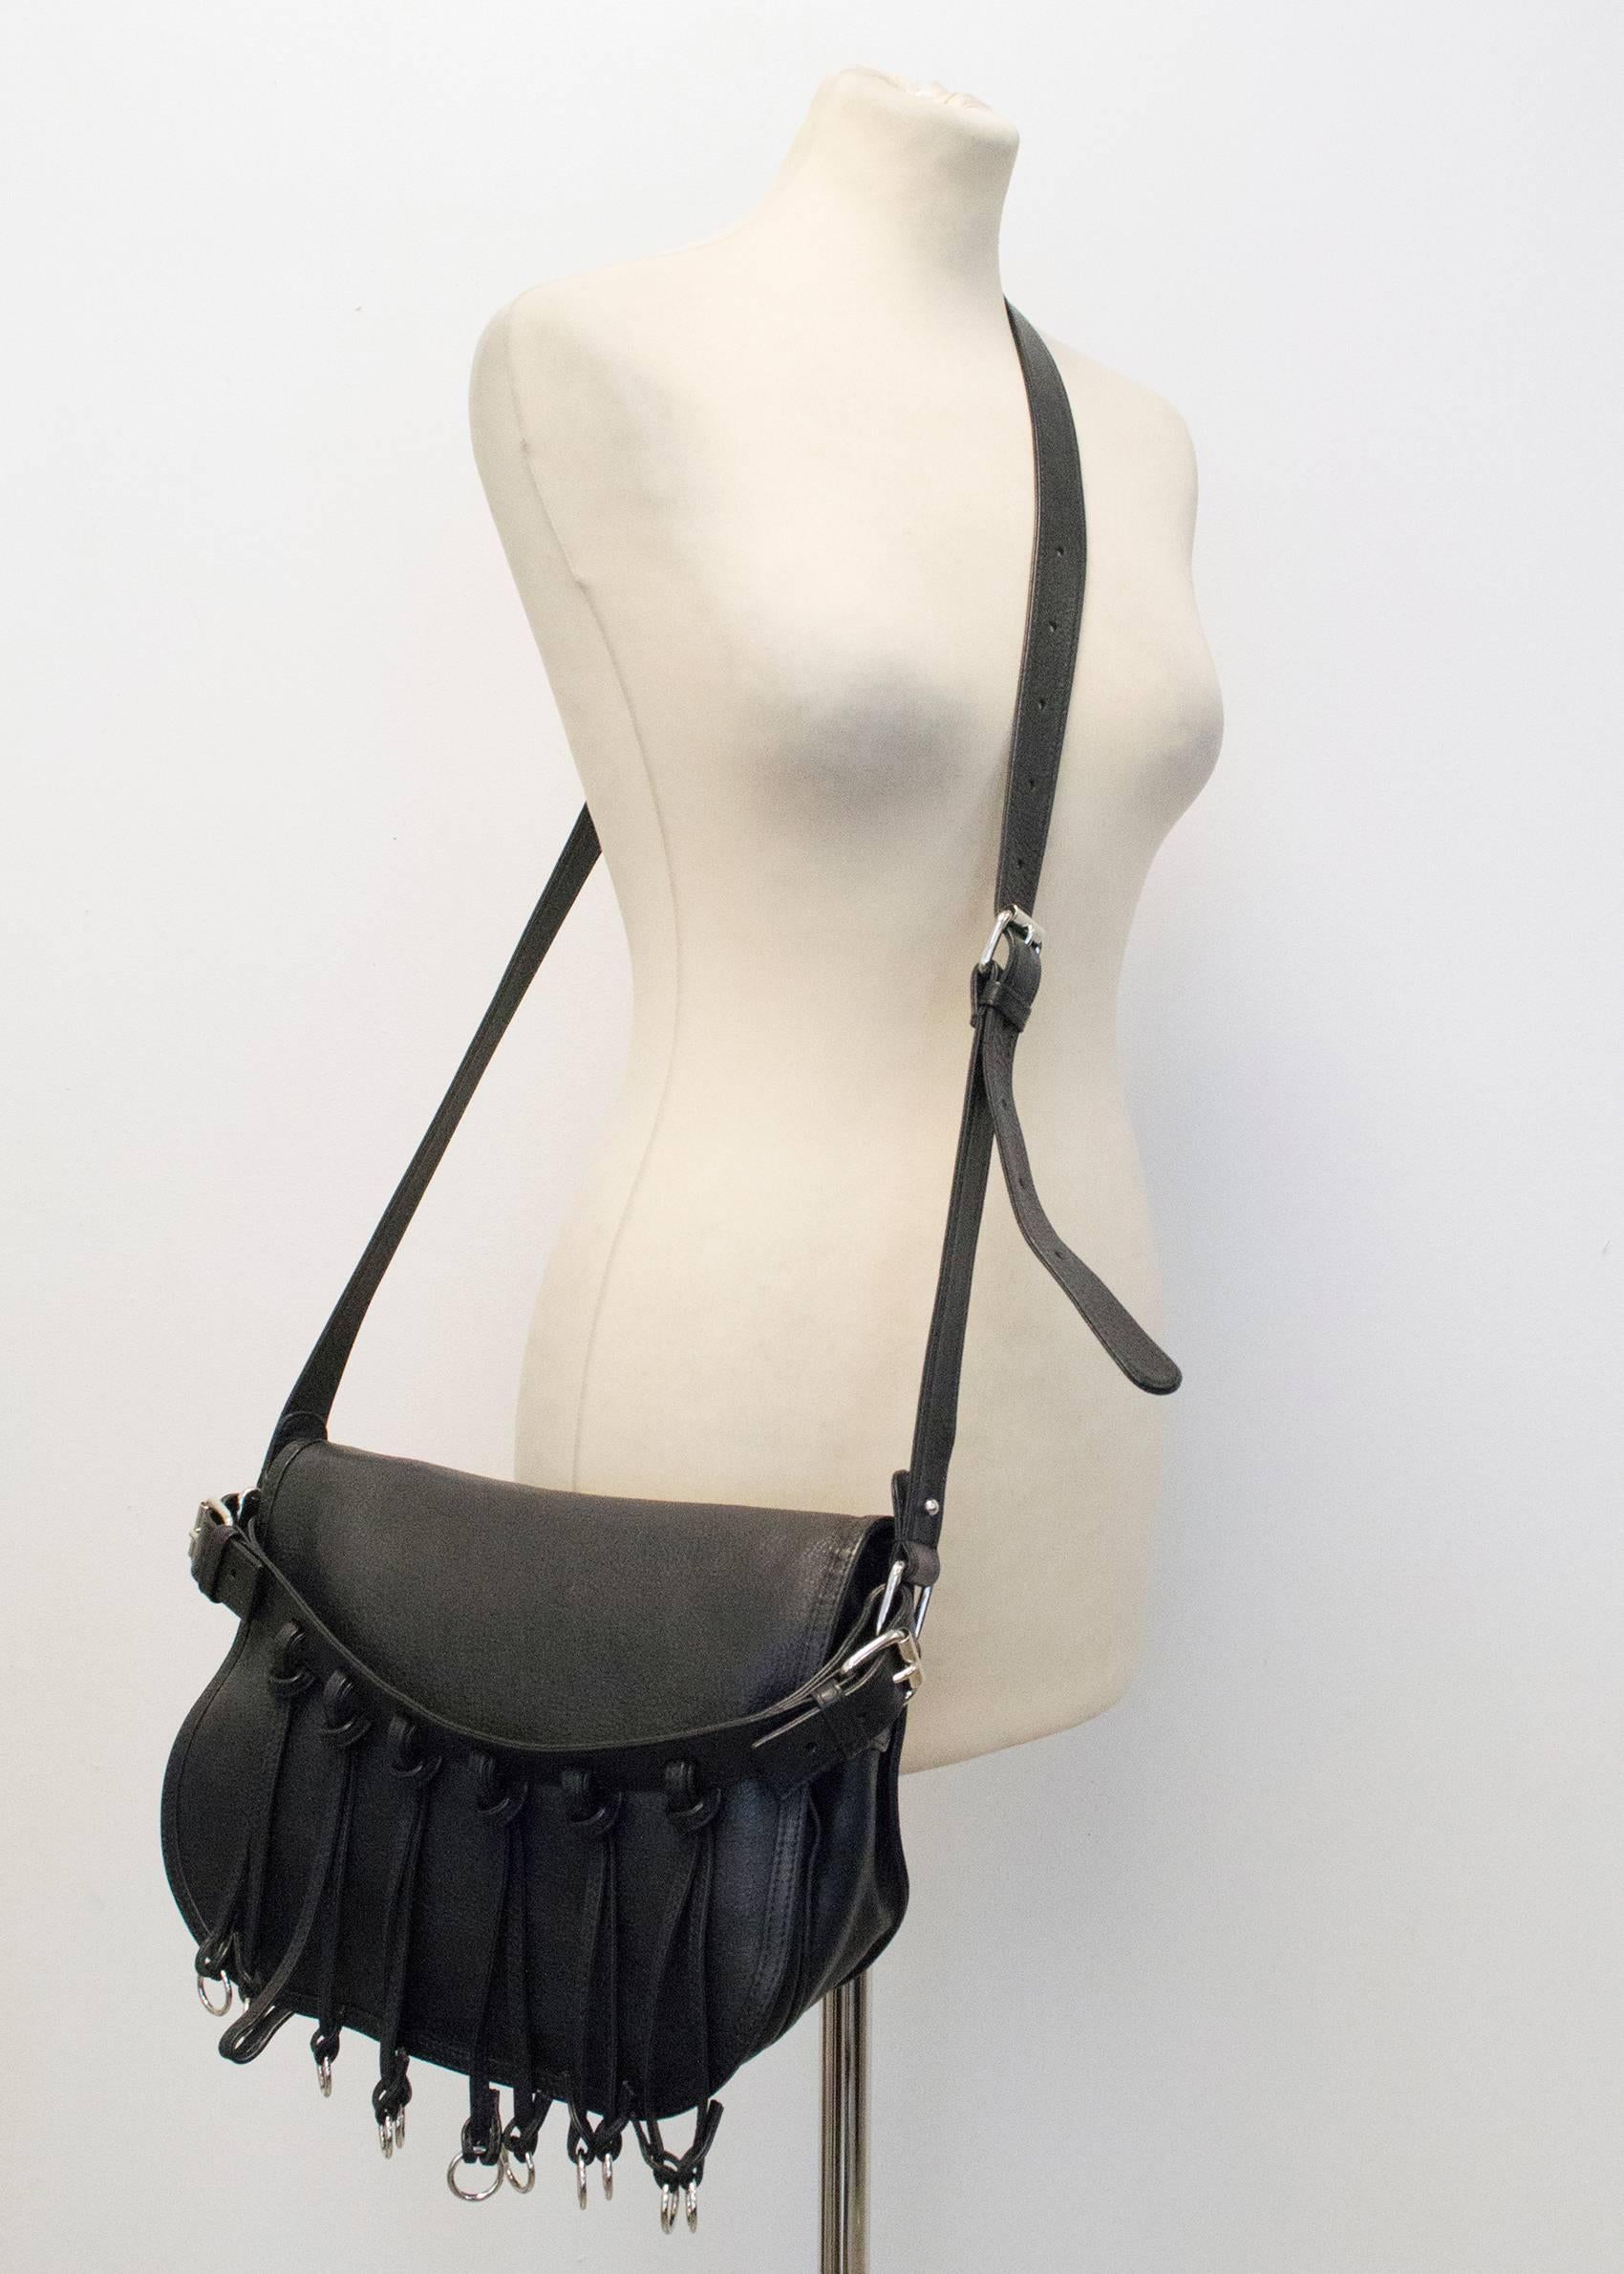 Balmain Fringed Black Saddle Bag In Excellent Condition For Sale In London, GB